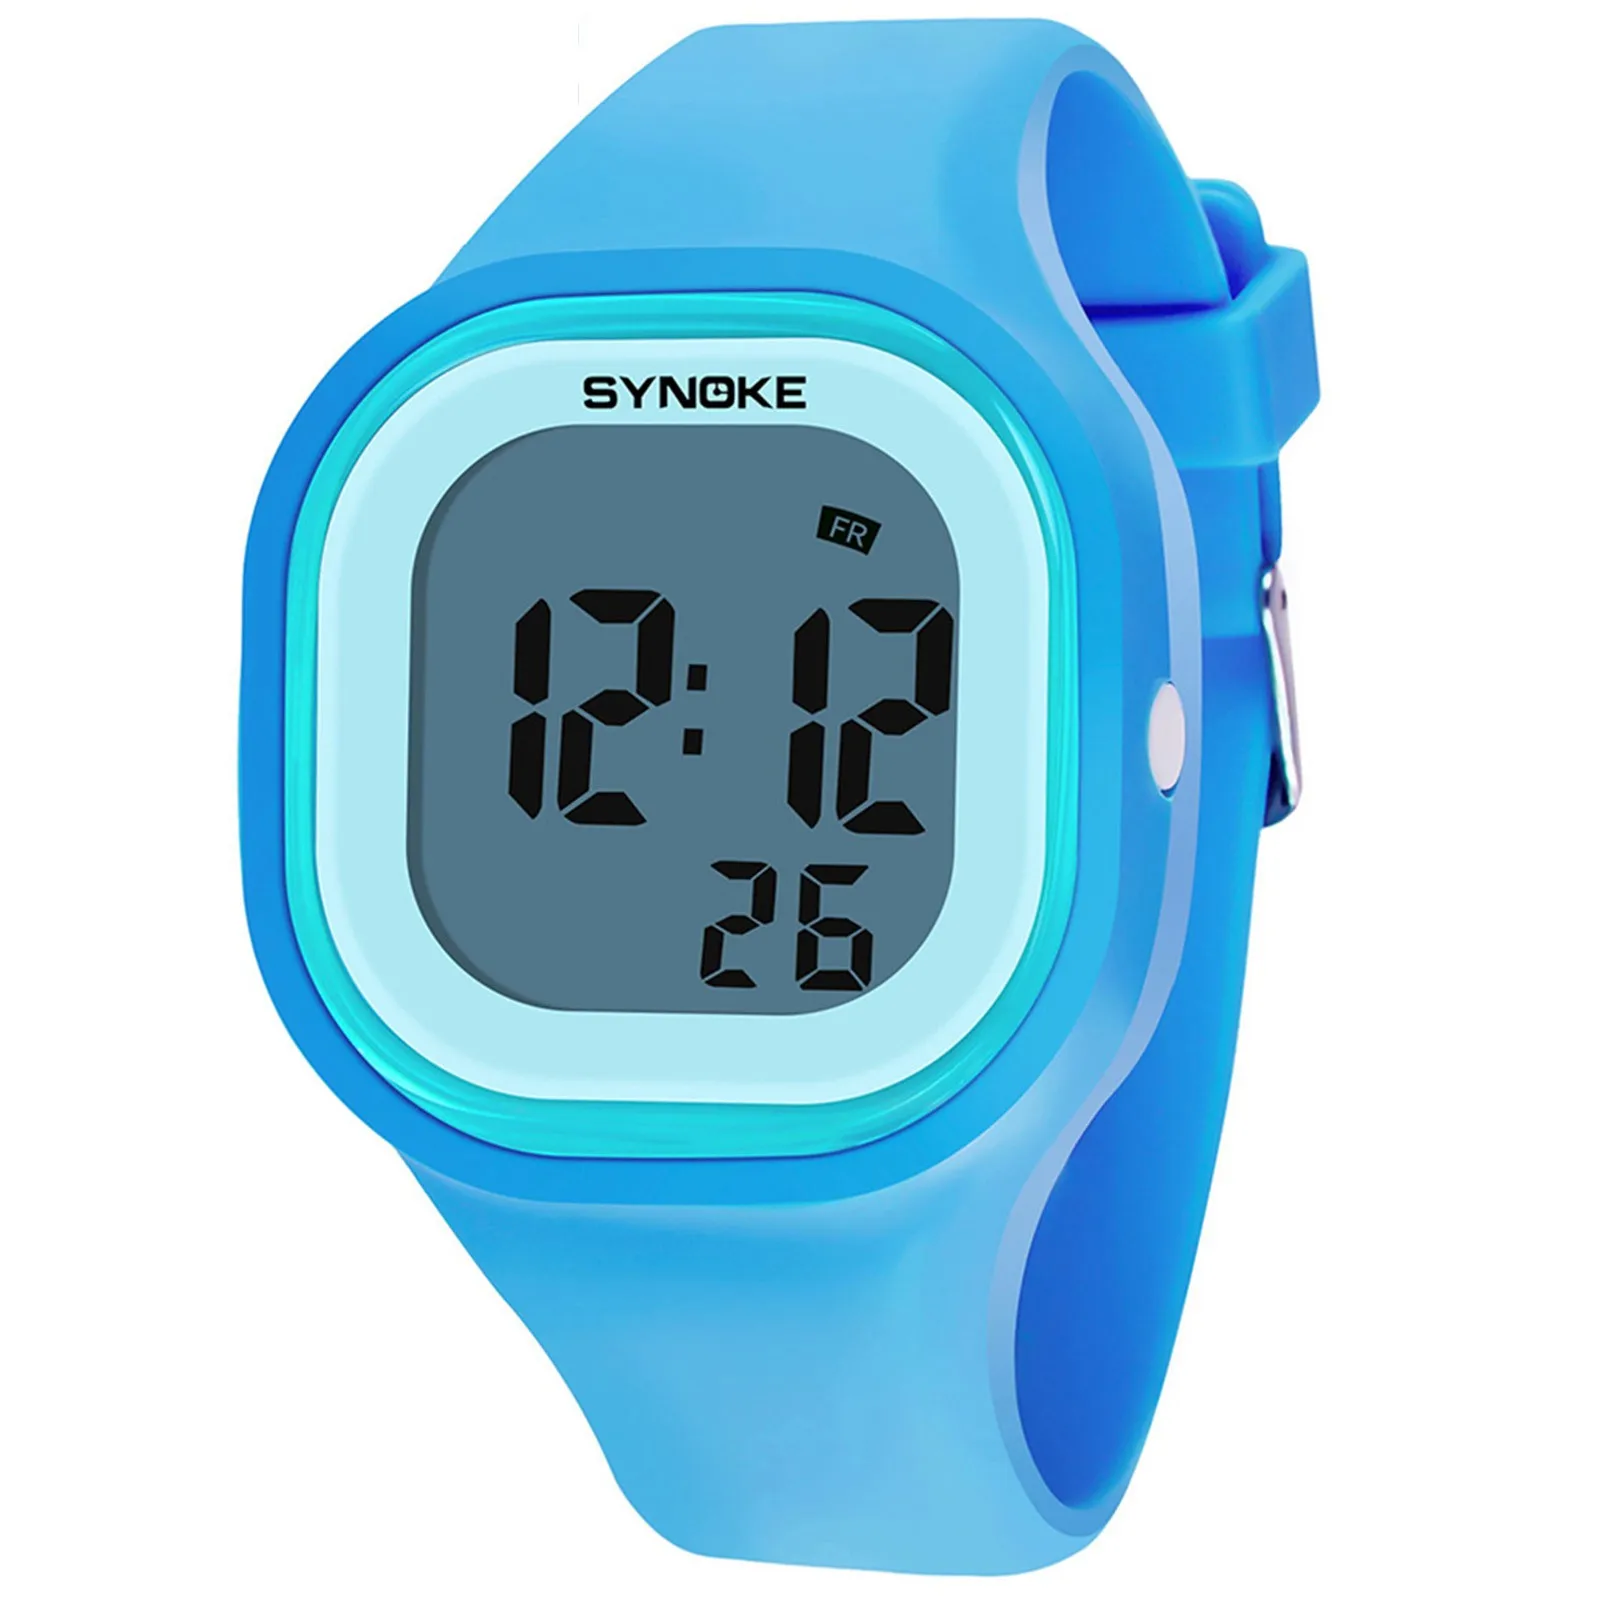 

Children'S Watches Over 12 Years Old Synoke Brand Digital Watch Waterproof Students Boys Watch Sports Wristwatch For Girl Kid